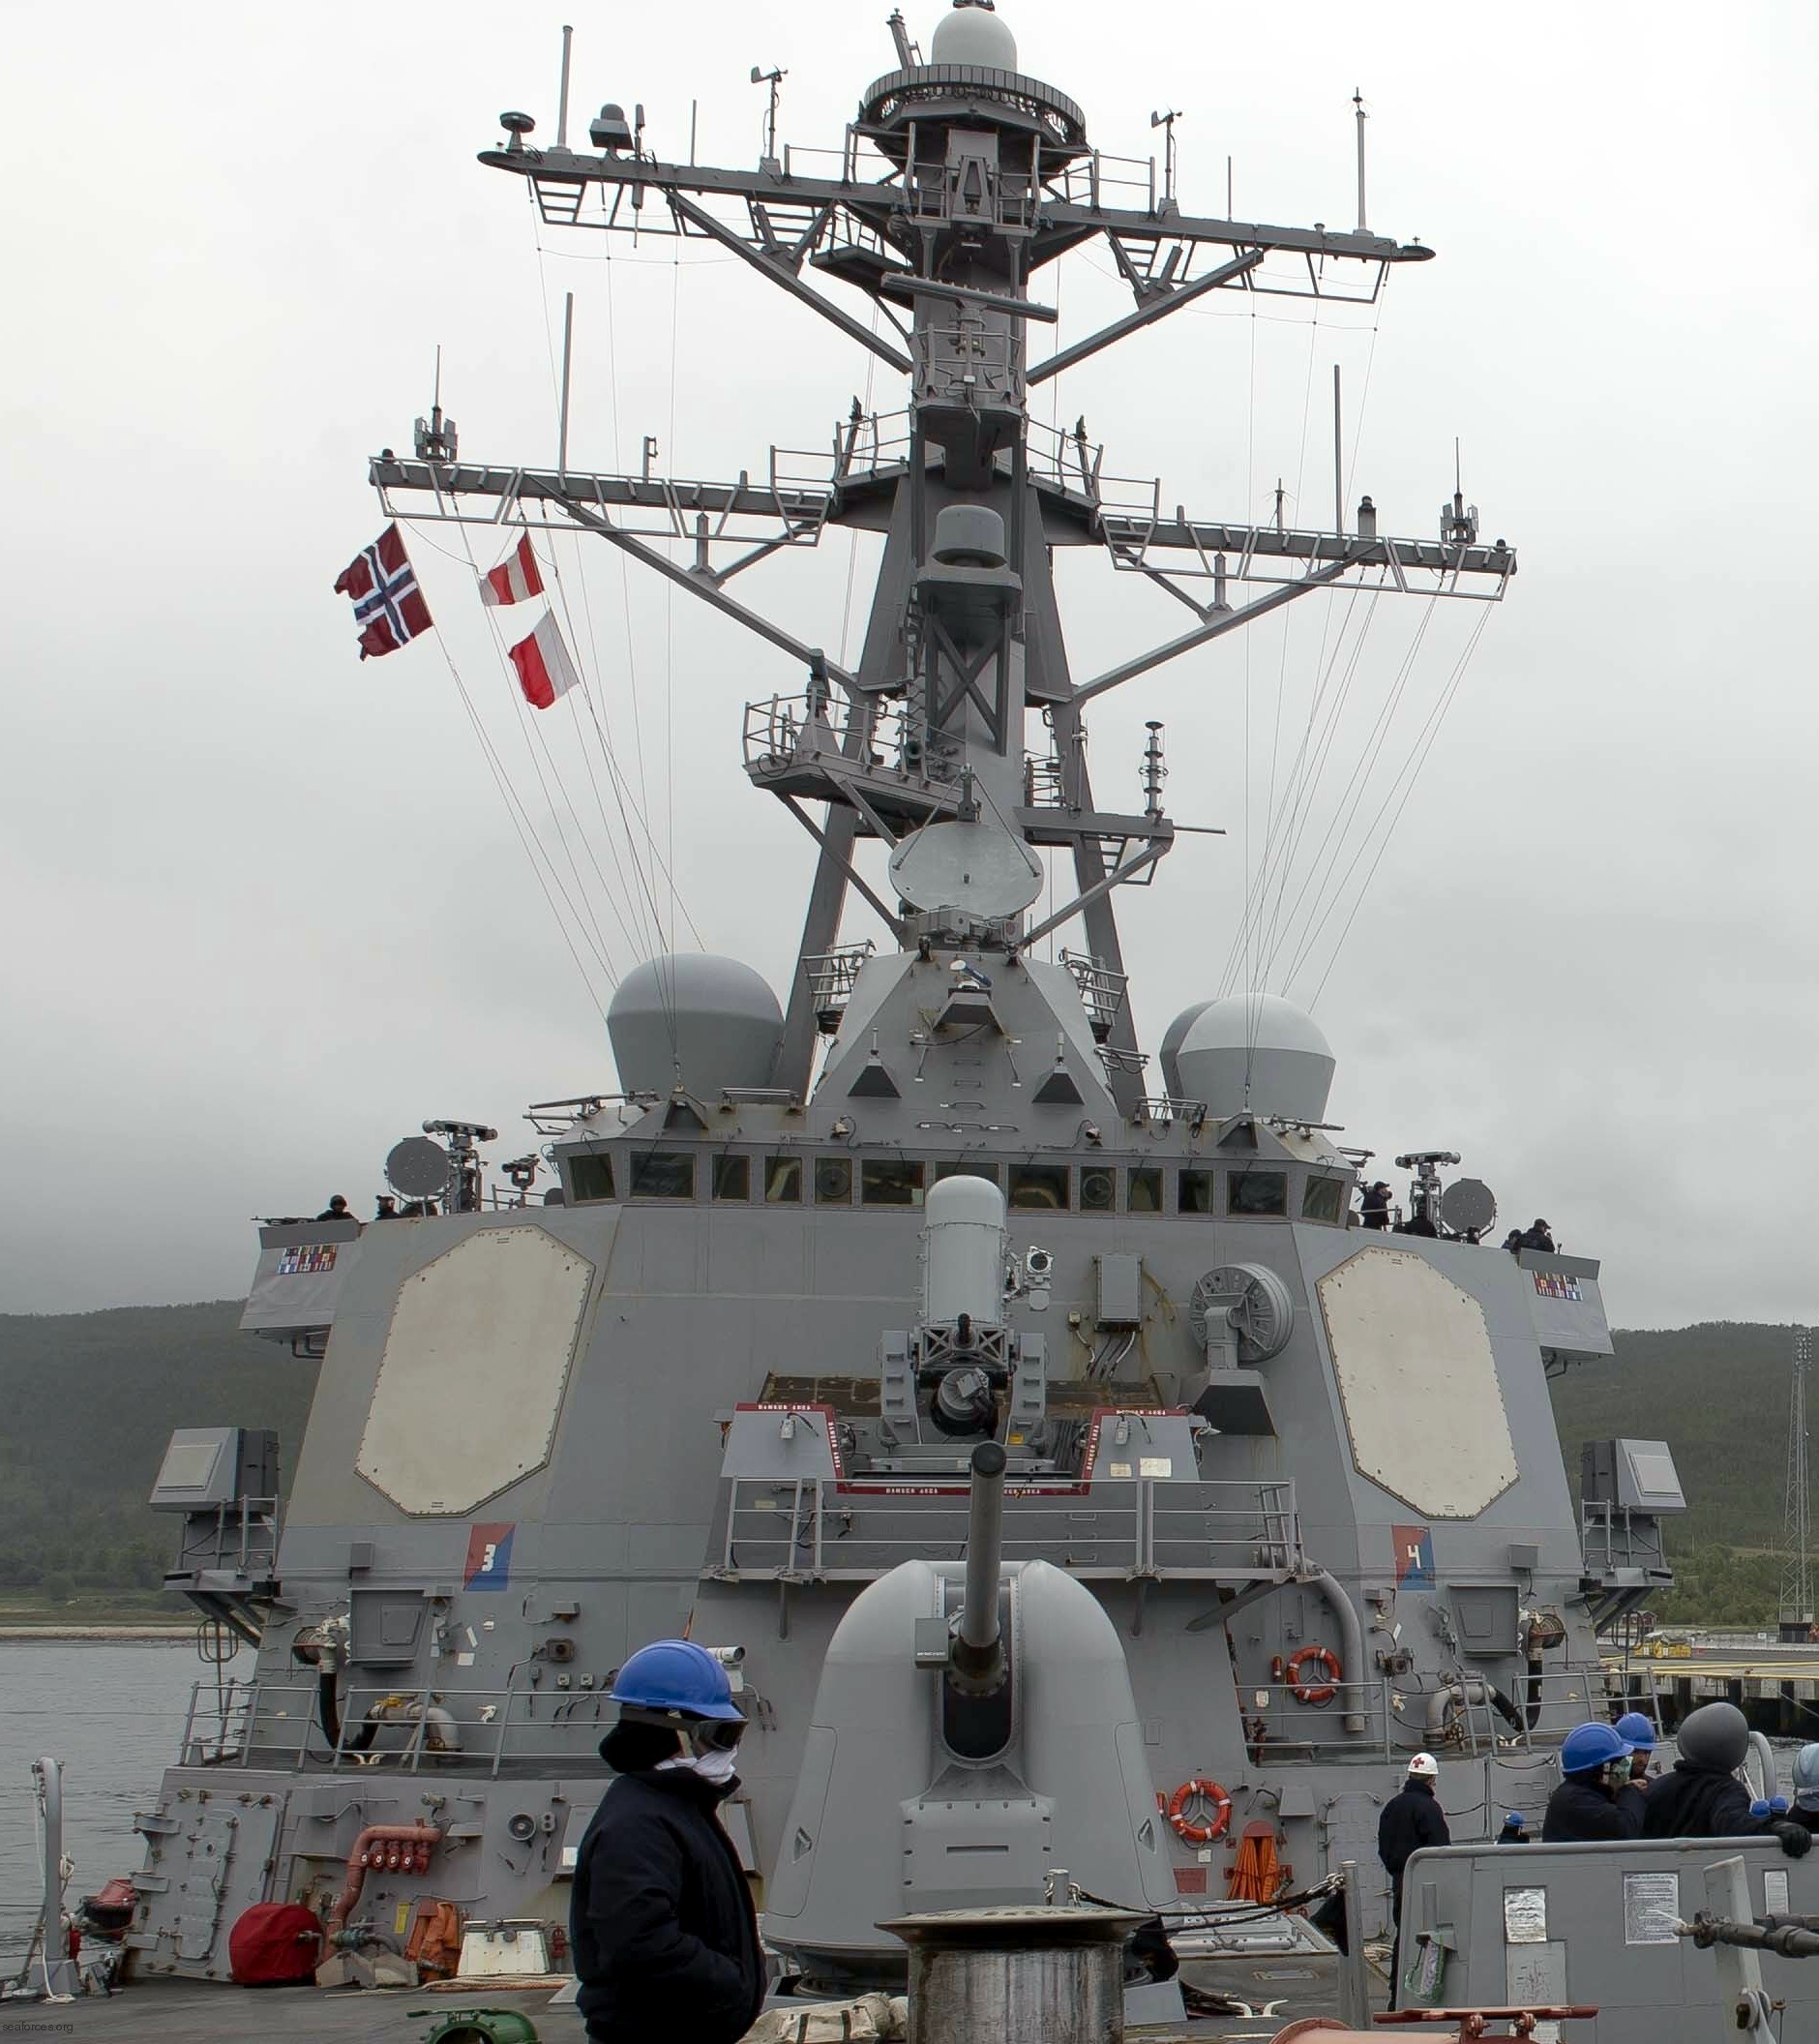 ddg-71 uss ross guided missile destroyer arleigh burke class aegis bmd 26